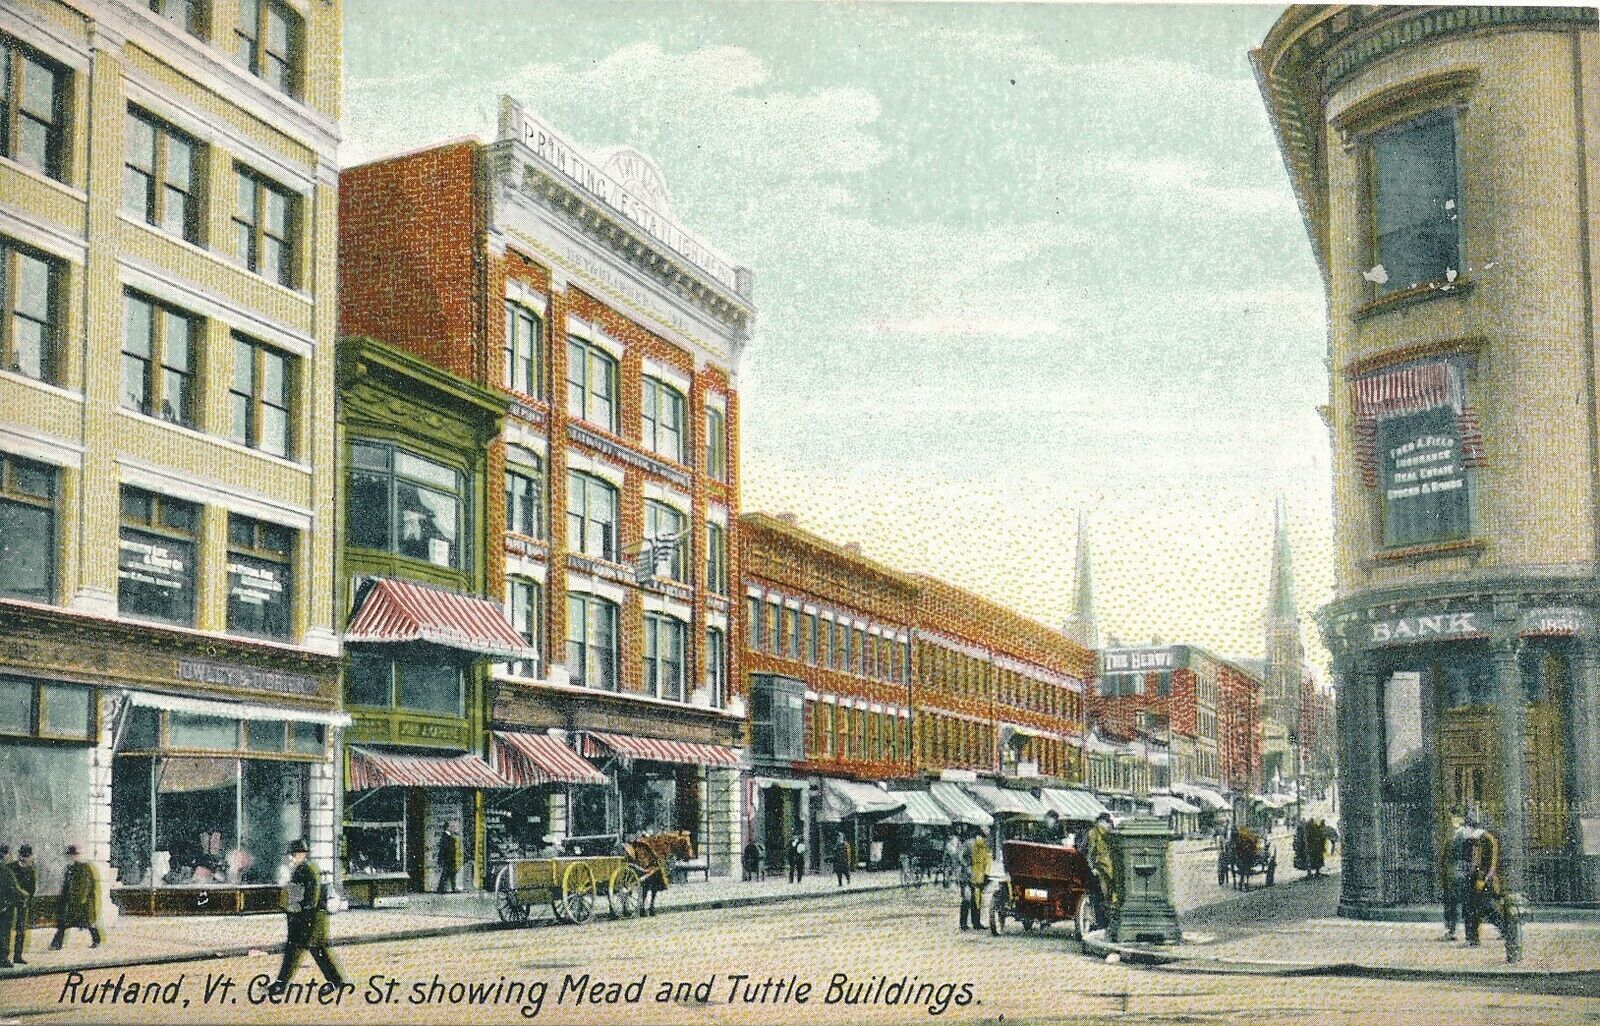 RUTLAND VT – Center Street showing Mead and Tuttle Buildings